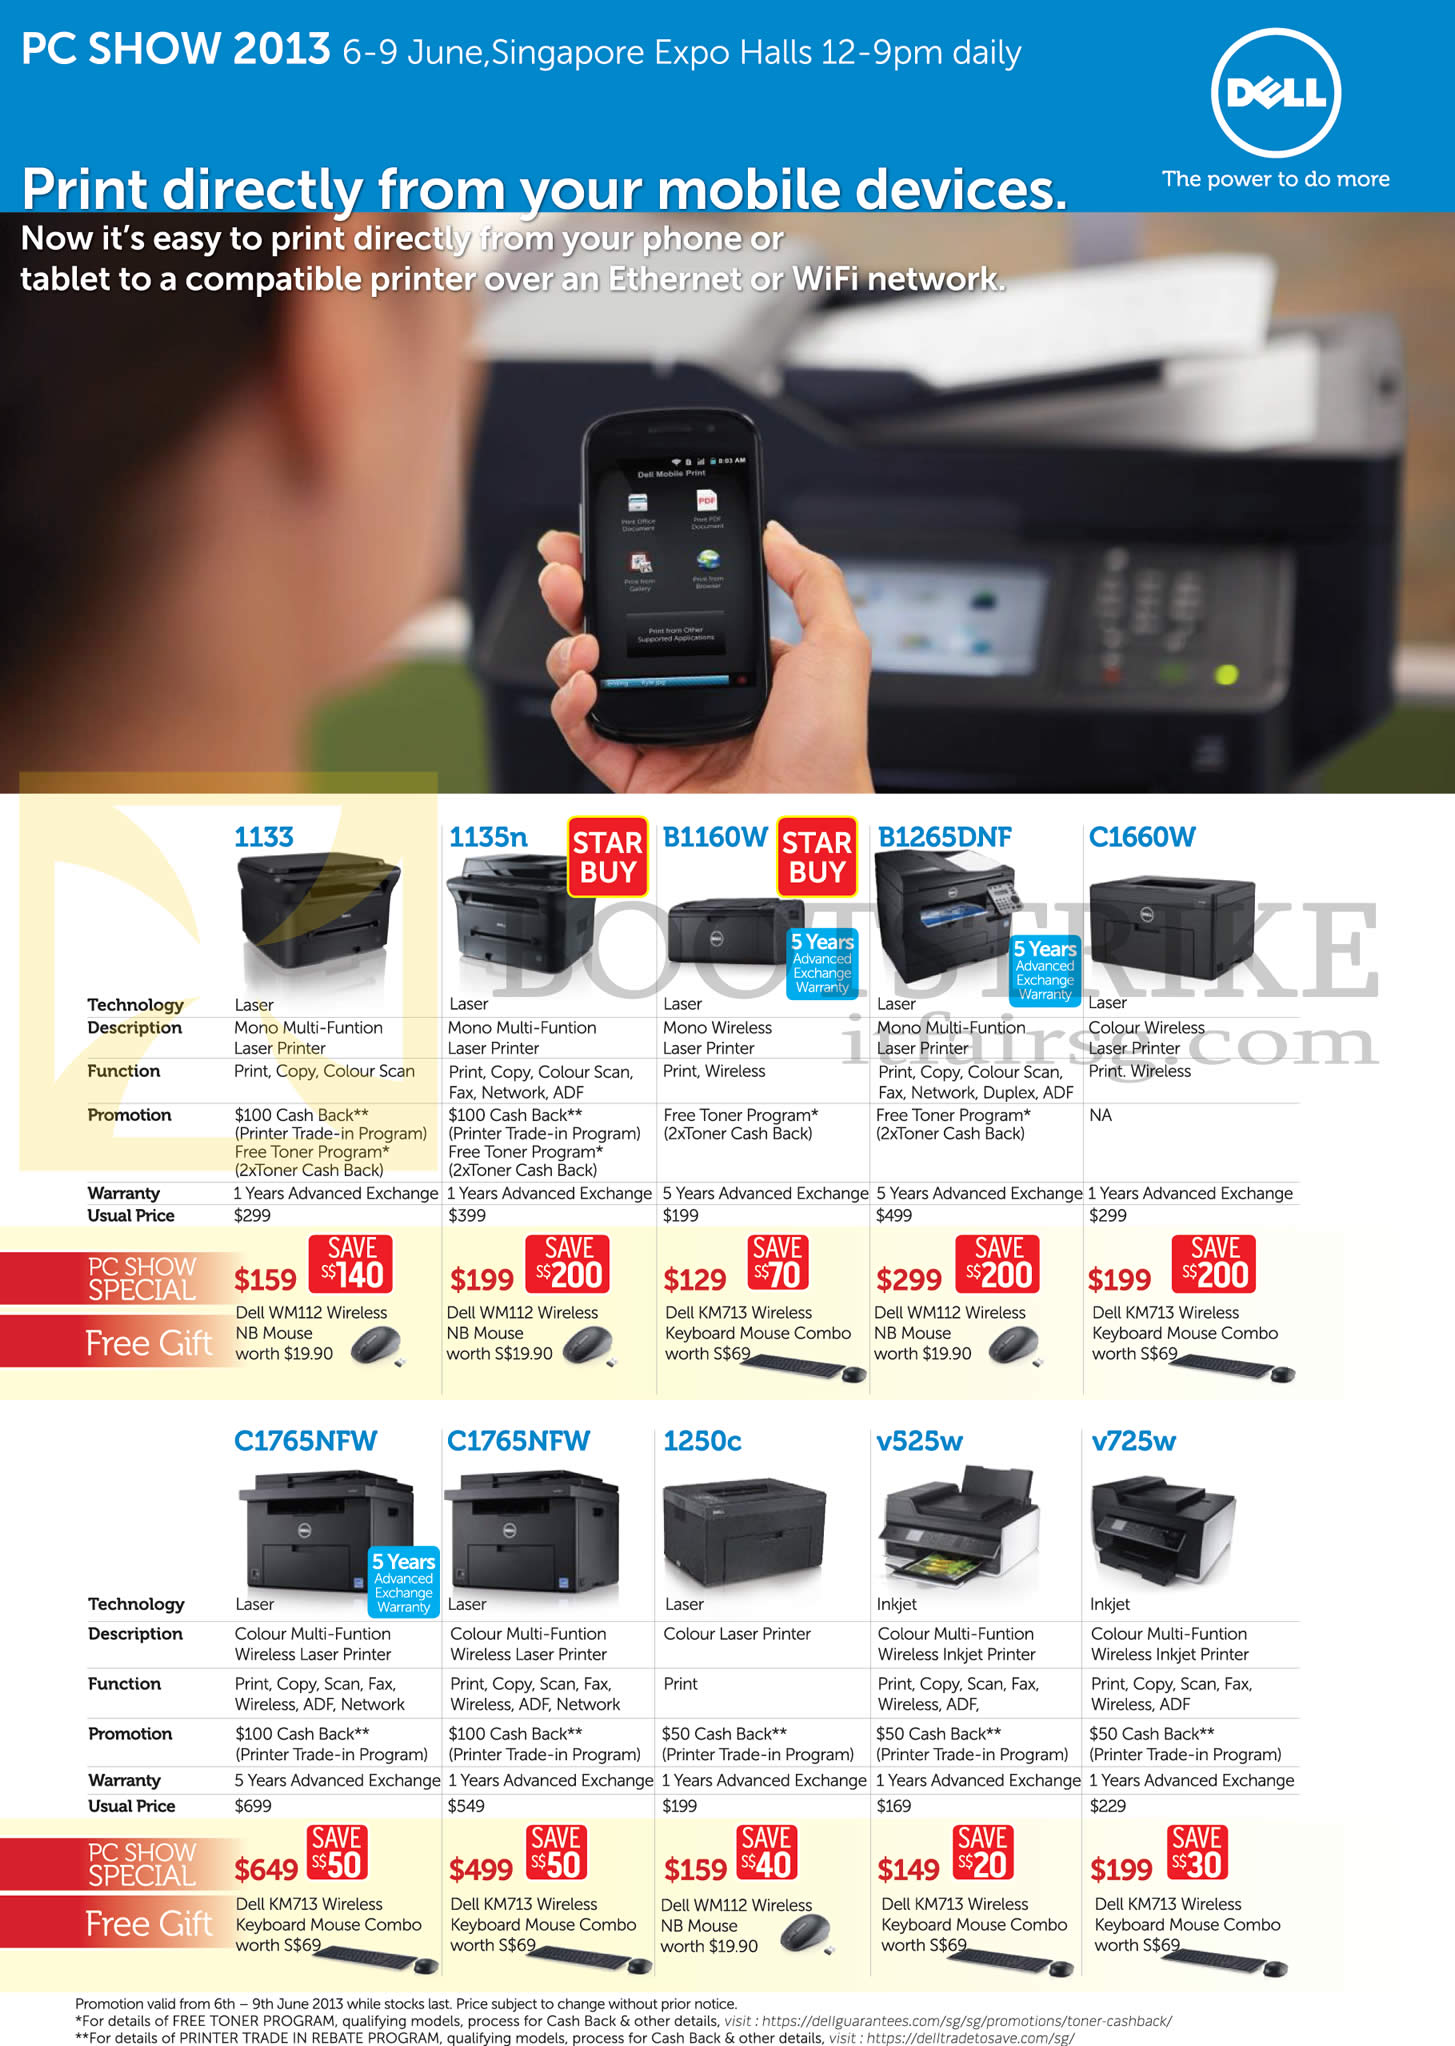 PC SHOW 2013 price list image brochure of Dell Printers 1133, 1135n, B1160W, B1265DNF, C1660W, C1765NFW, 1250C, V525W, V725W